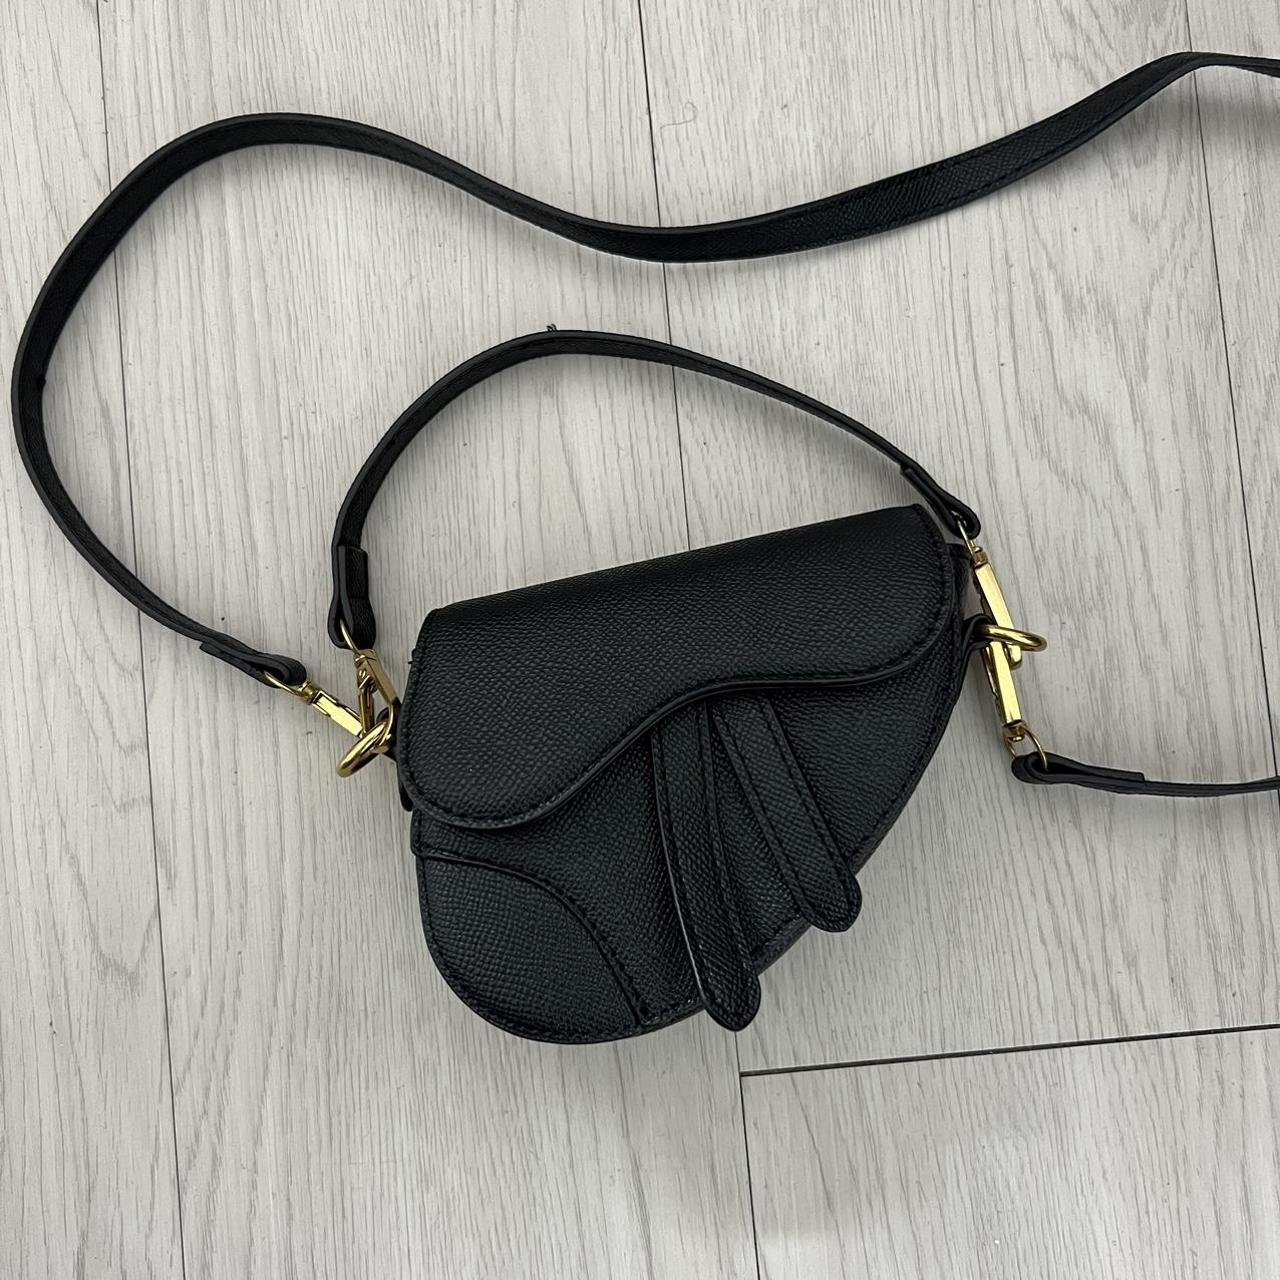 Dior Women's Black and Gold Bag